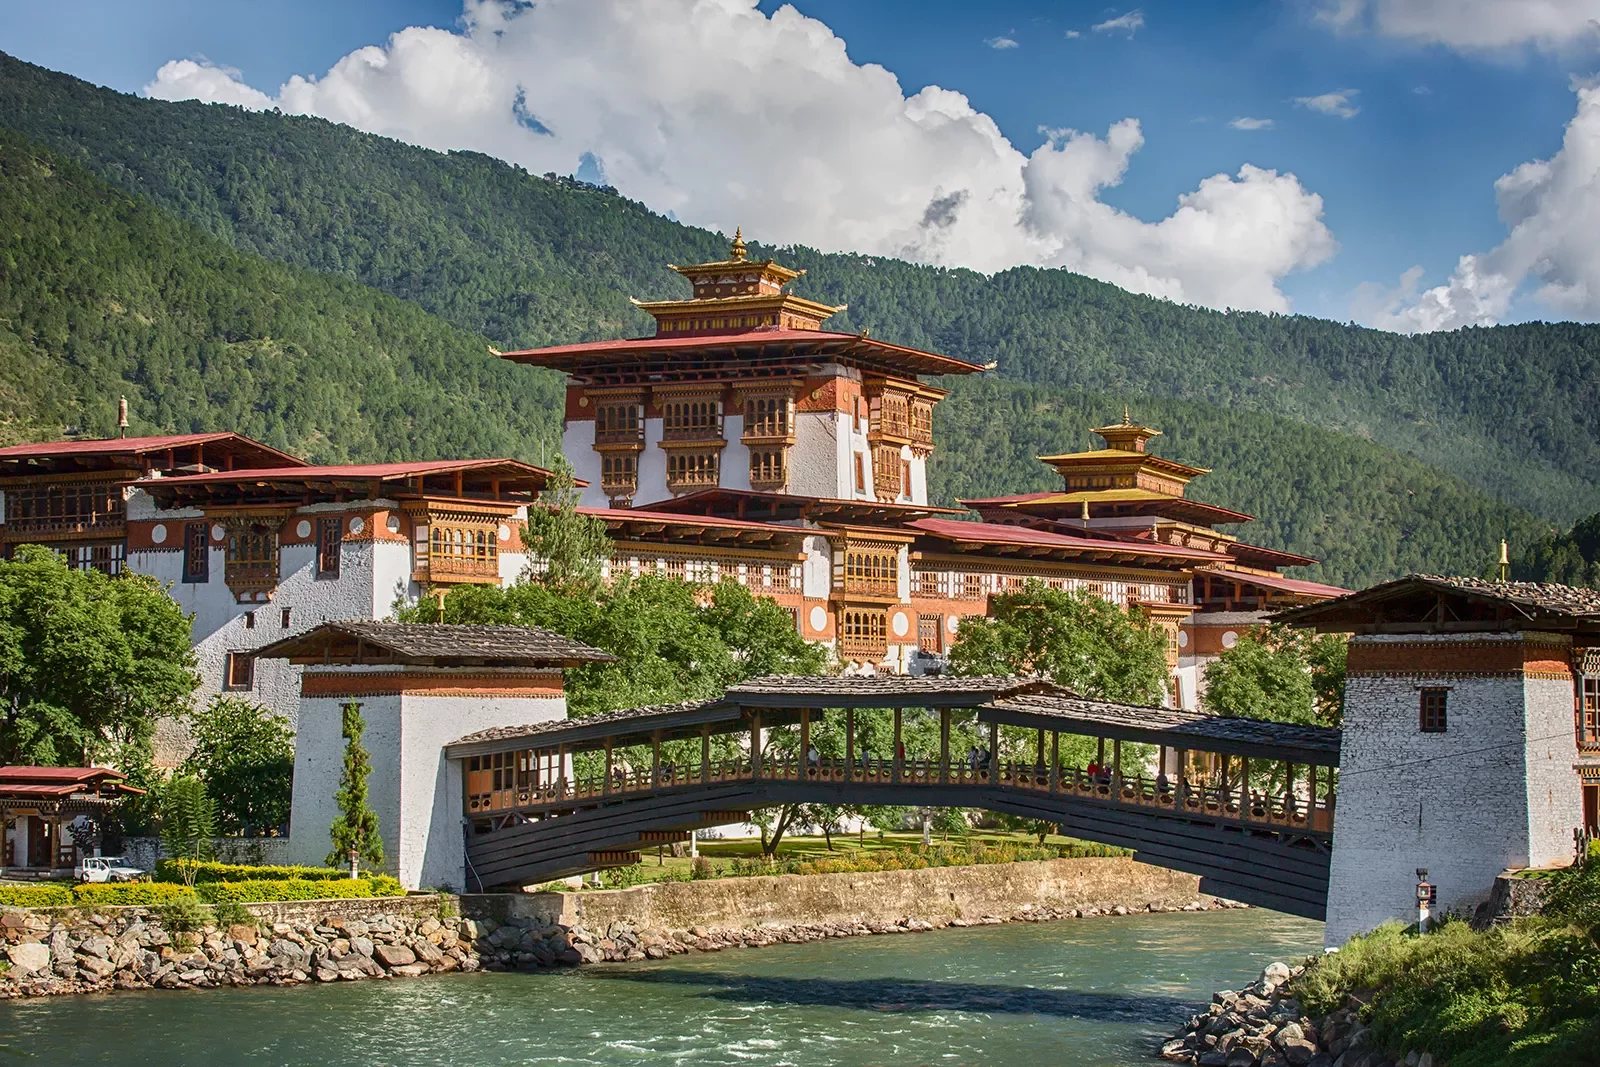 Ancient temple structure in Bhutan